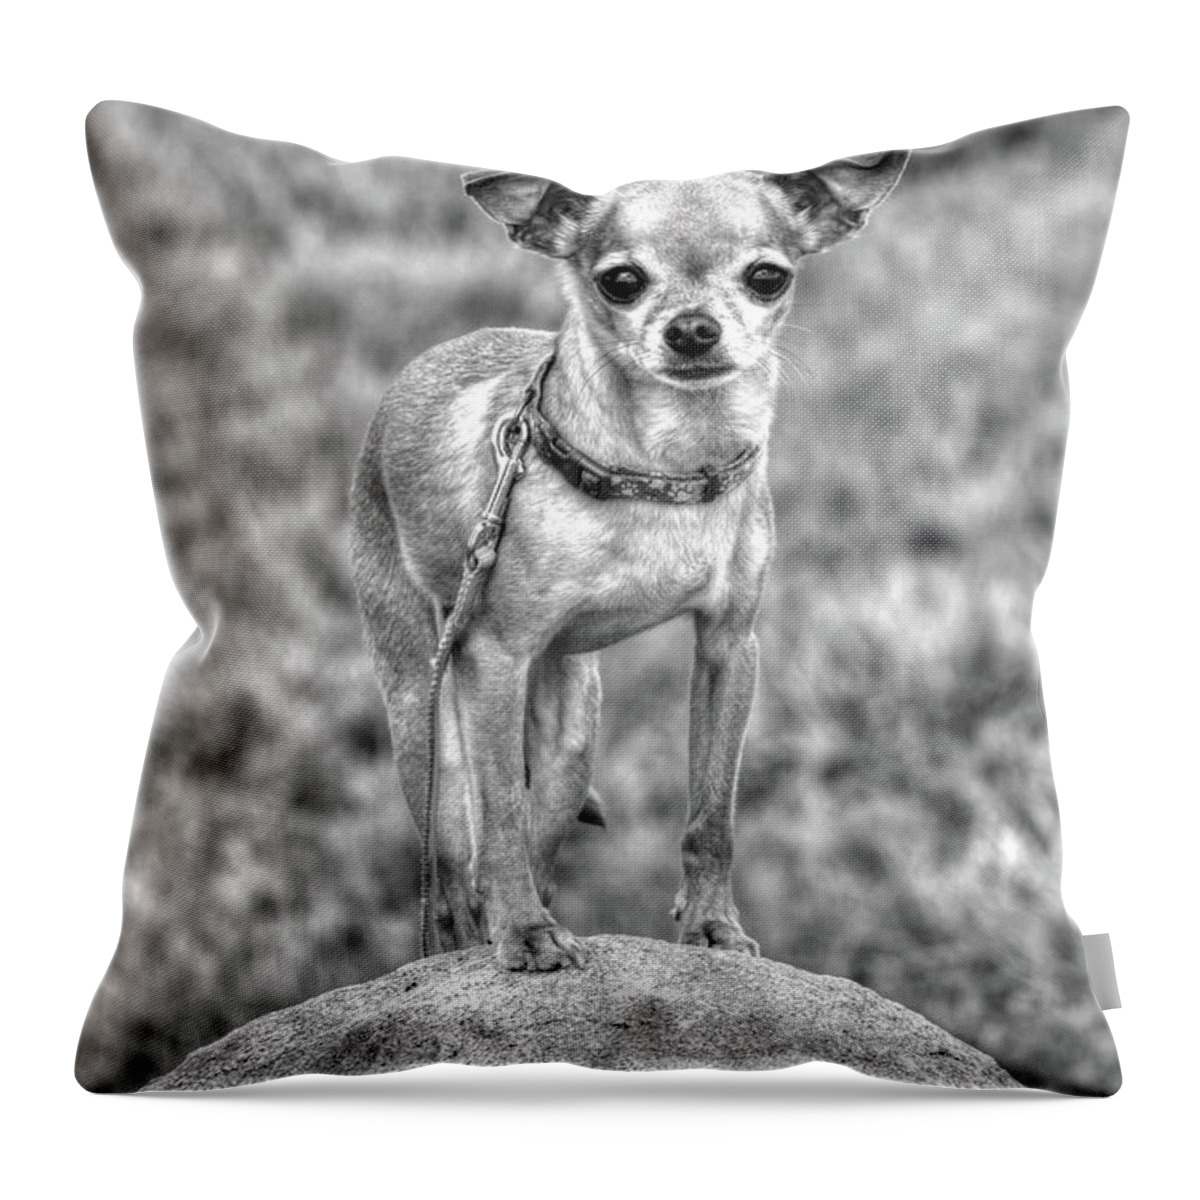 Chihuahua Throw Pillow featuring the photograph Rock Star by J Laughlin